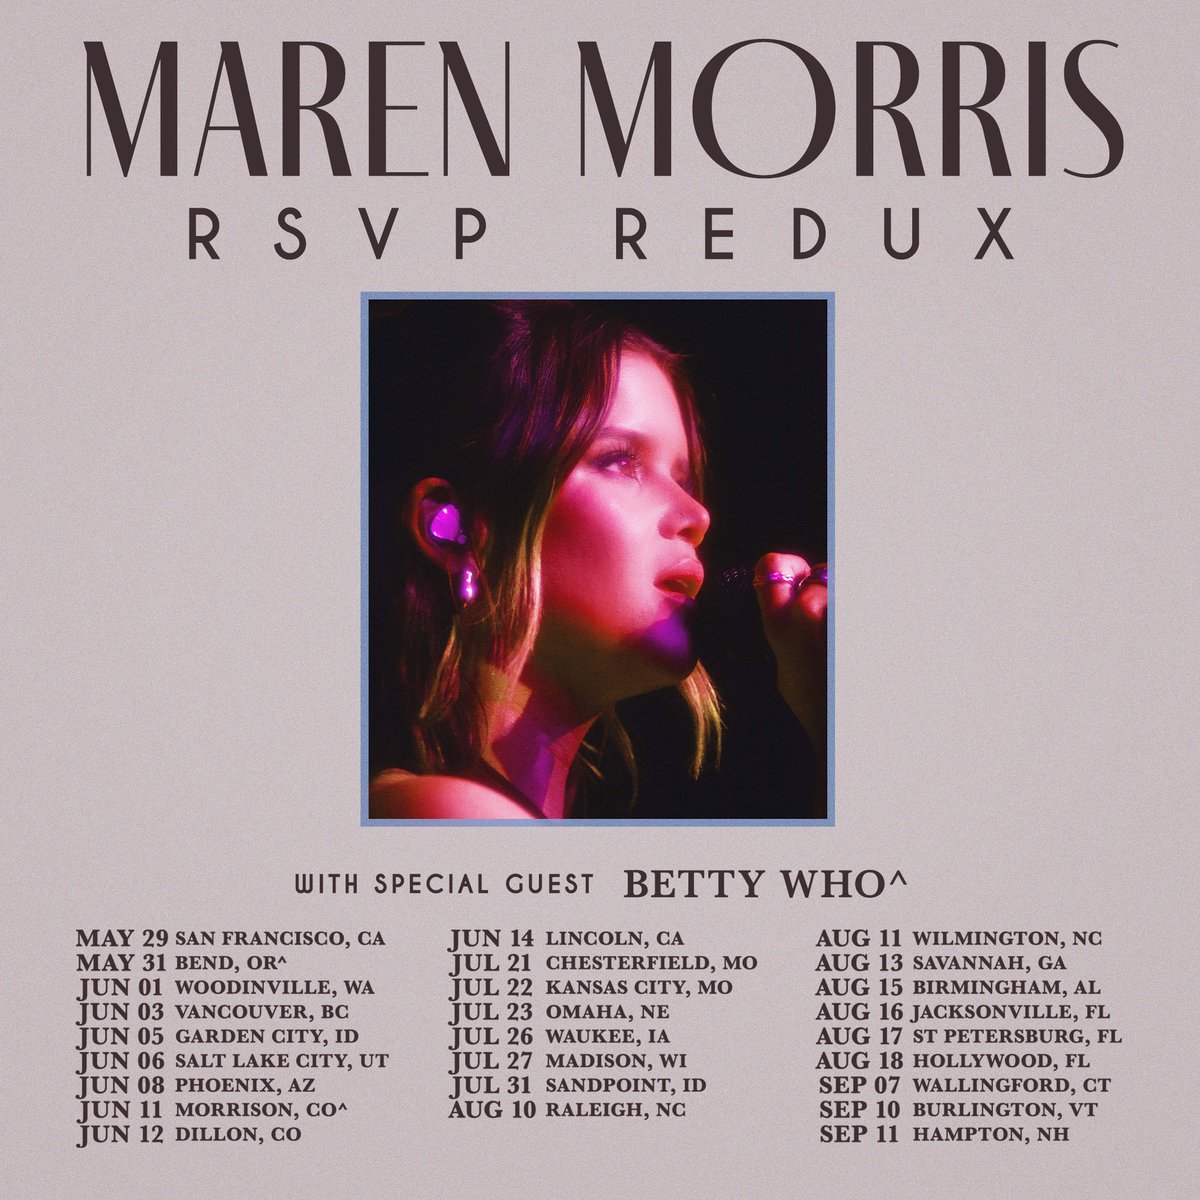 Thank you @MarenMorris for making tix for your #RSVPRedux tour very affordable. It's greatly appreciated. 

The Hollywood, FL show is 4 days after my birthday...so I gifted myself tix to see you. 😍

#MarenMorris